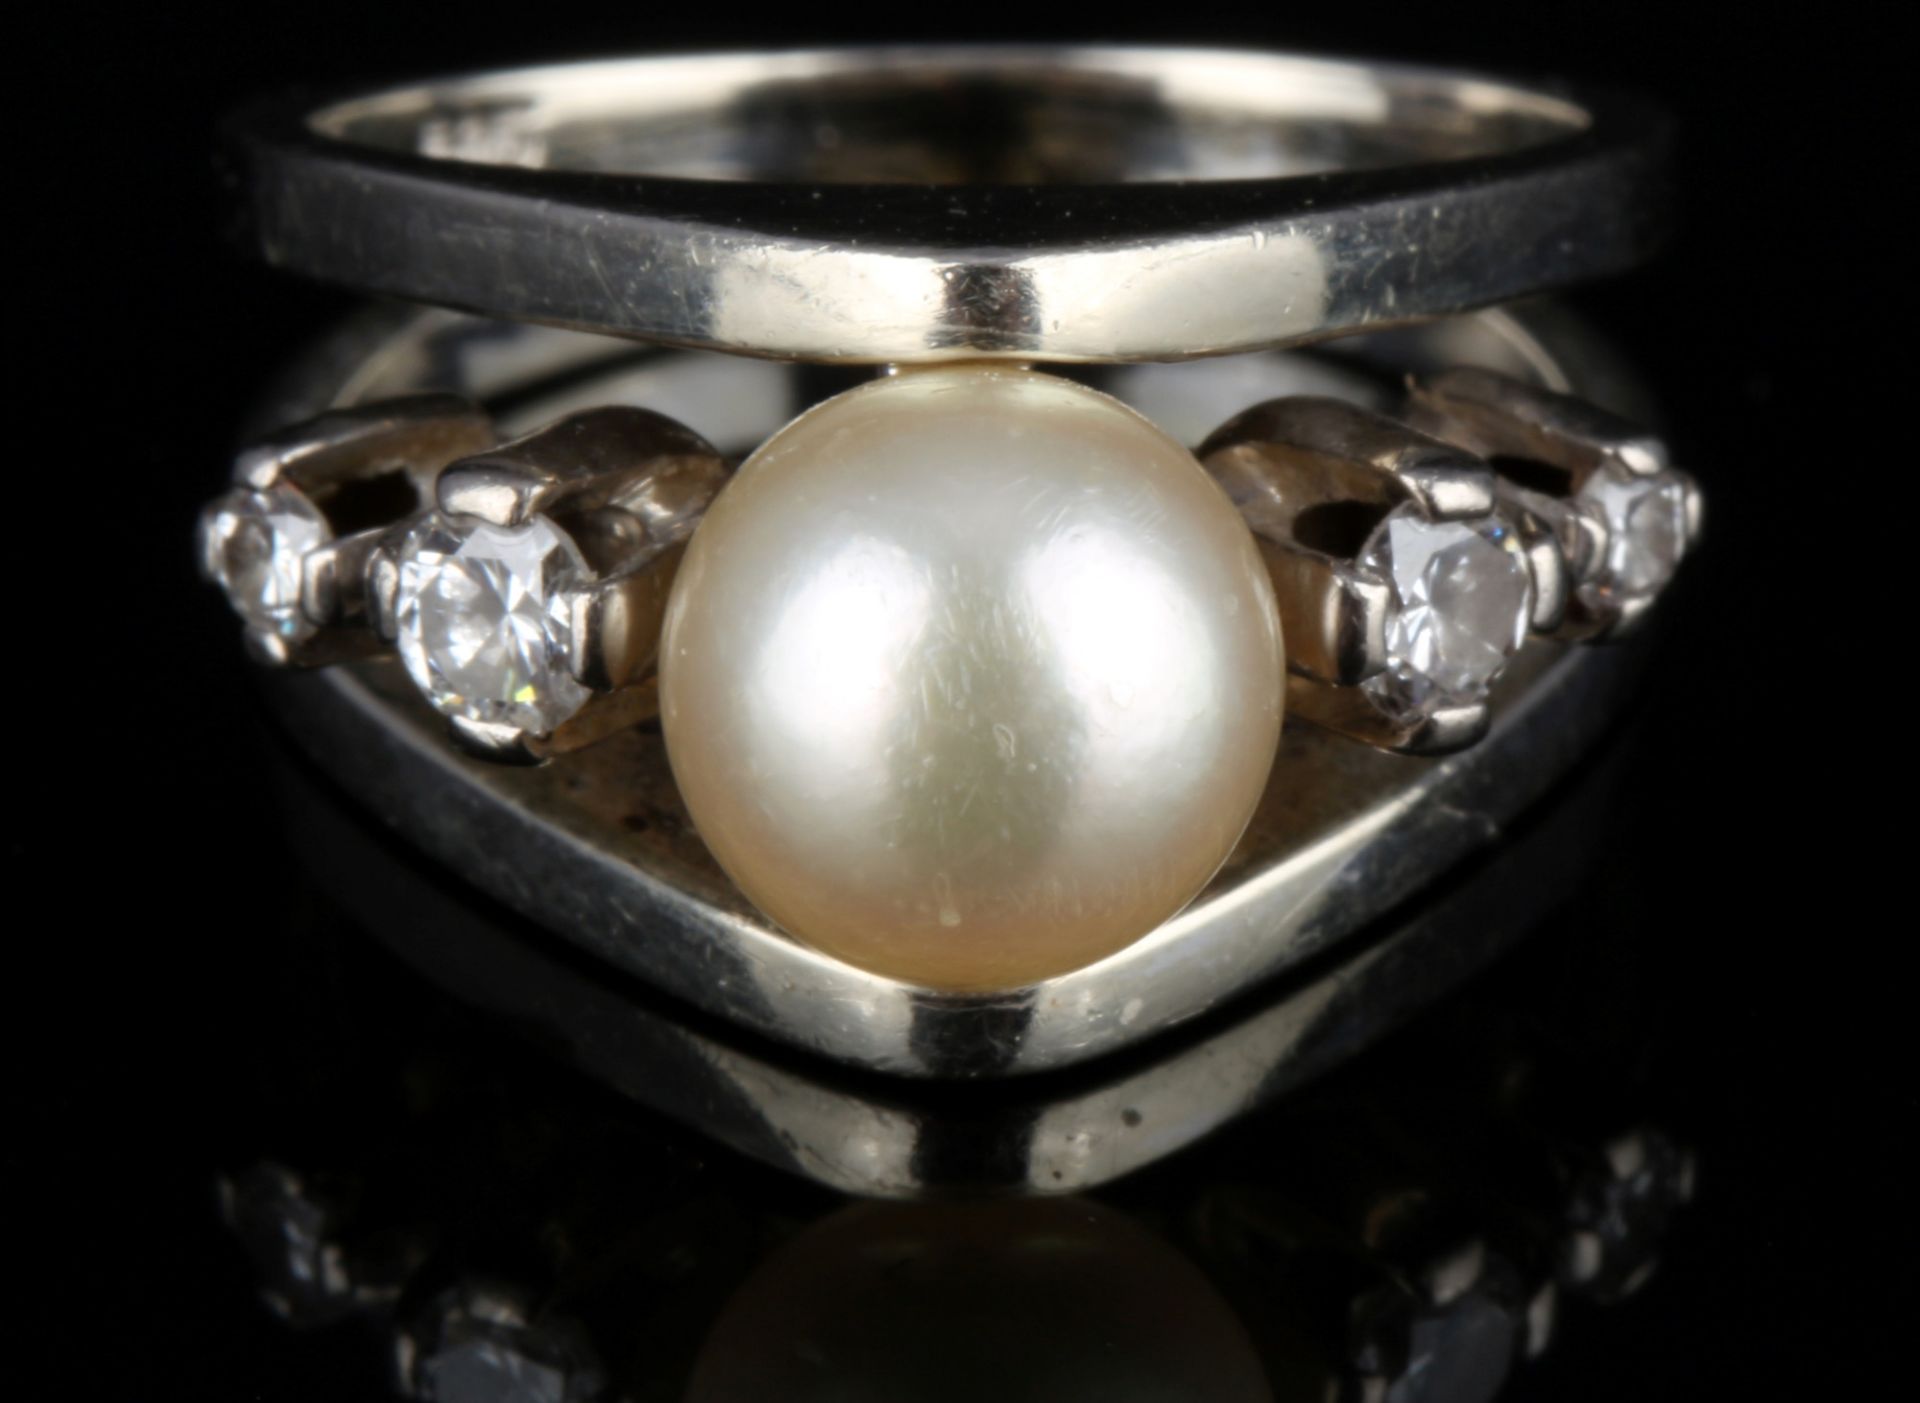 585 gold ring with pearl and 4 diamonds, 14K Gold Ring mit Perle und 4 Brillanten, - Image 2 of 4